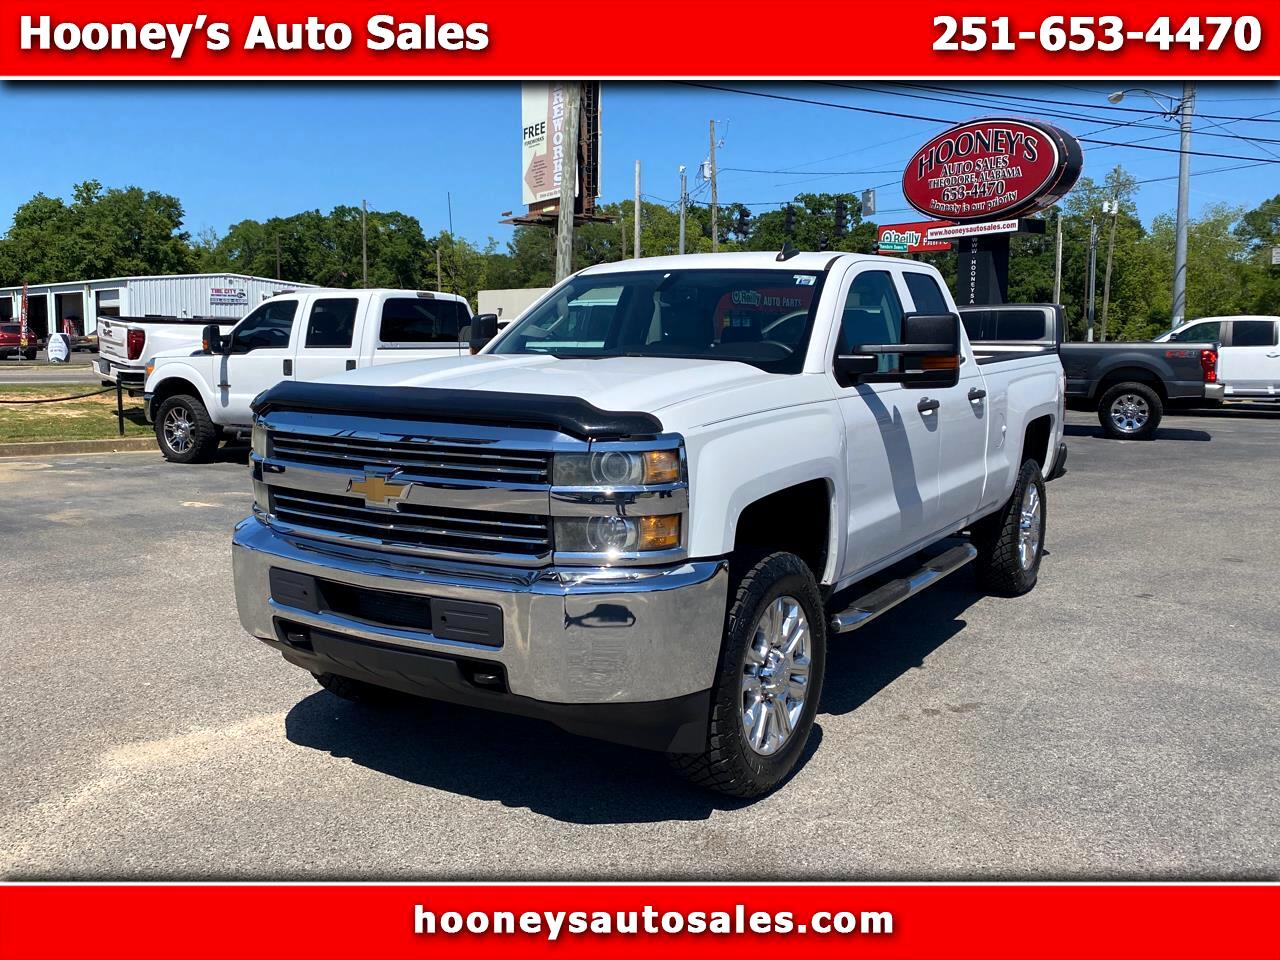 2015 Chevrolet Silverado 2500HD Built After Aug 14 2WD Double Cab 144.2" Work Truck